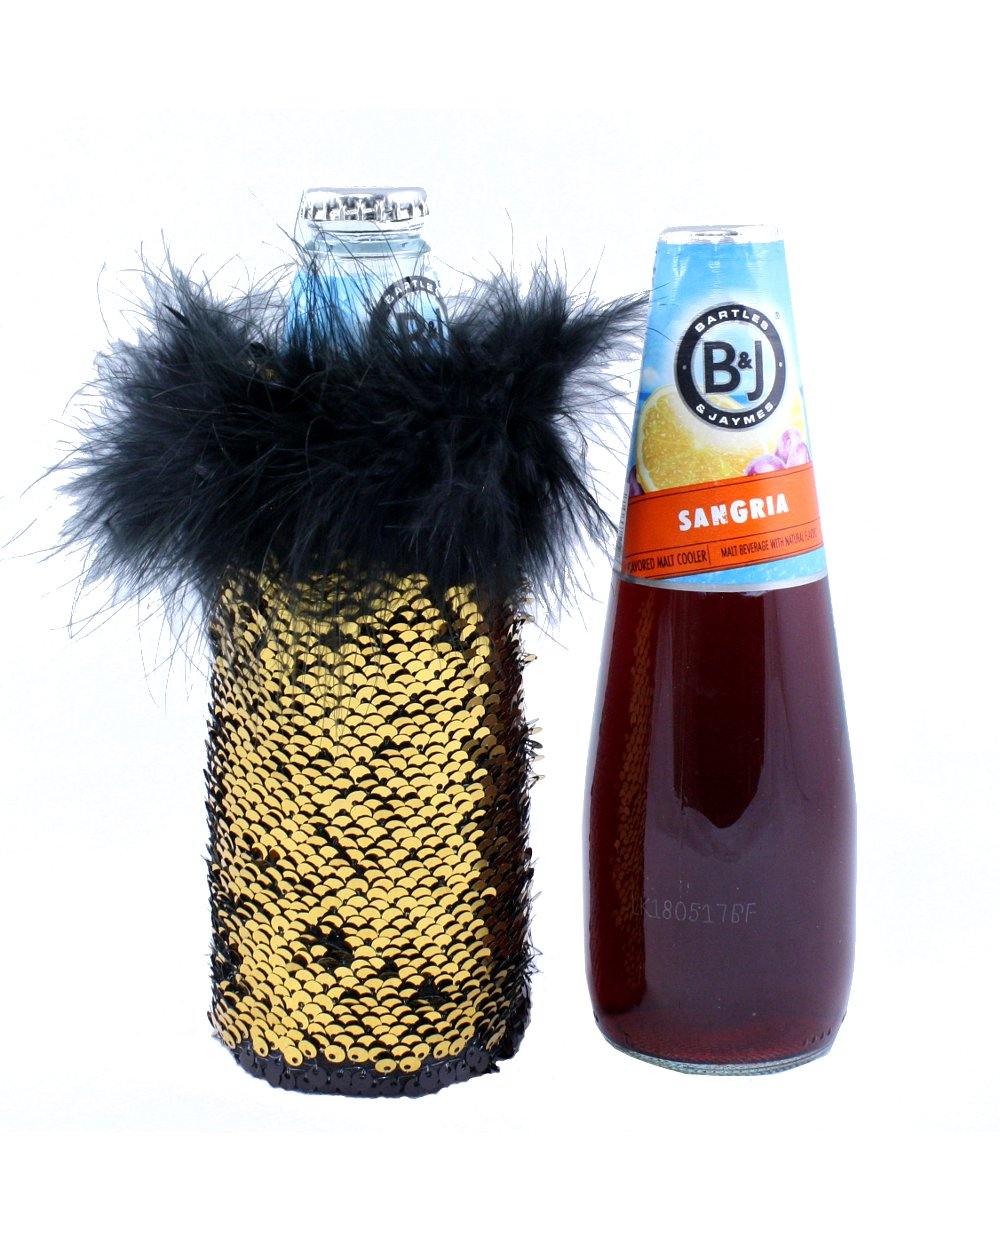 Wine Cooler Sequin Koozie. Tipsy Totes coolies hold beer, water, wine coolers and more!